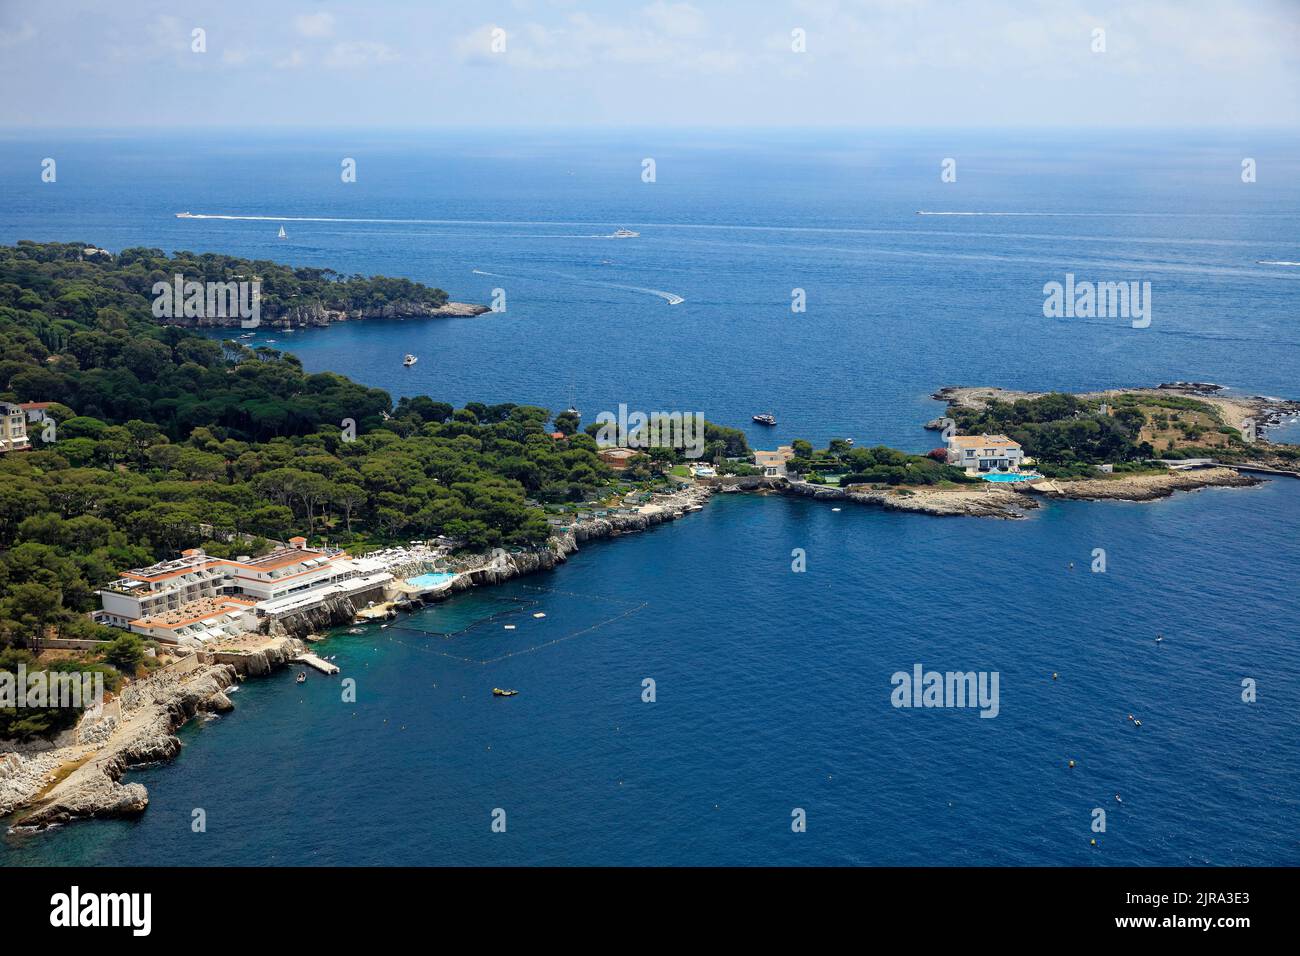 Antibes (south-eastern France): aerial view of the Peninsula of Antibes with the luxury hotel and restaurant Eden Roc and villas along the waterfront Stock Photo